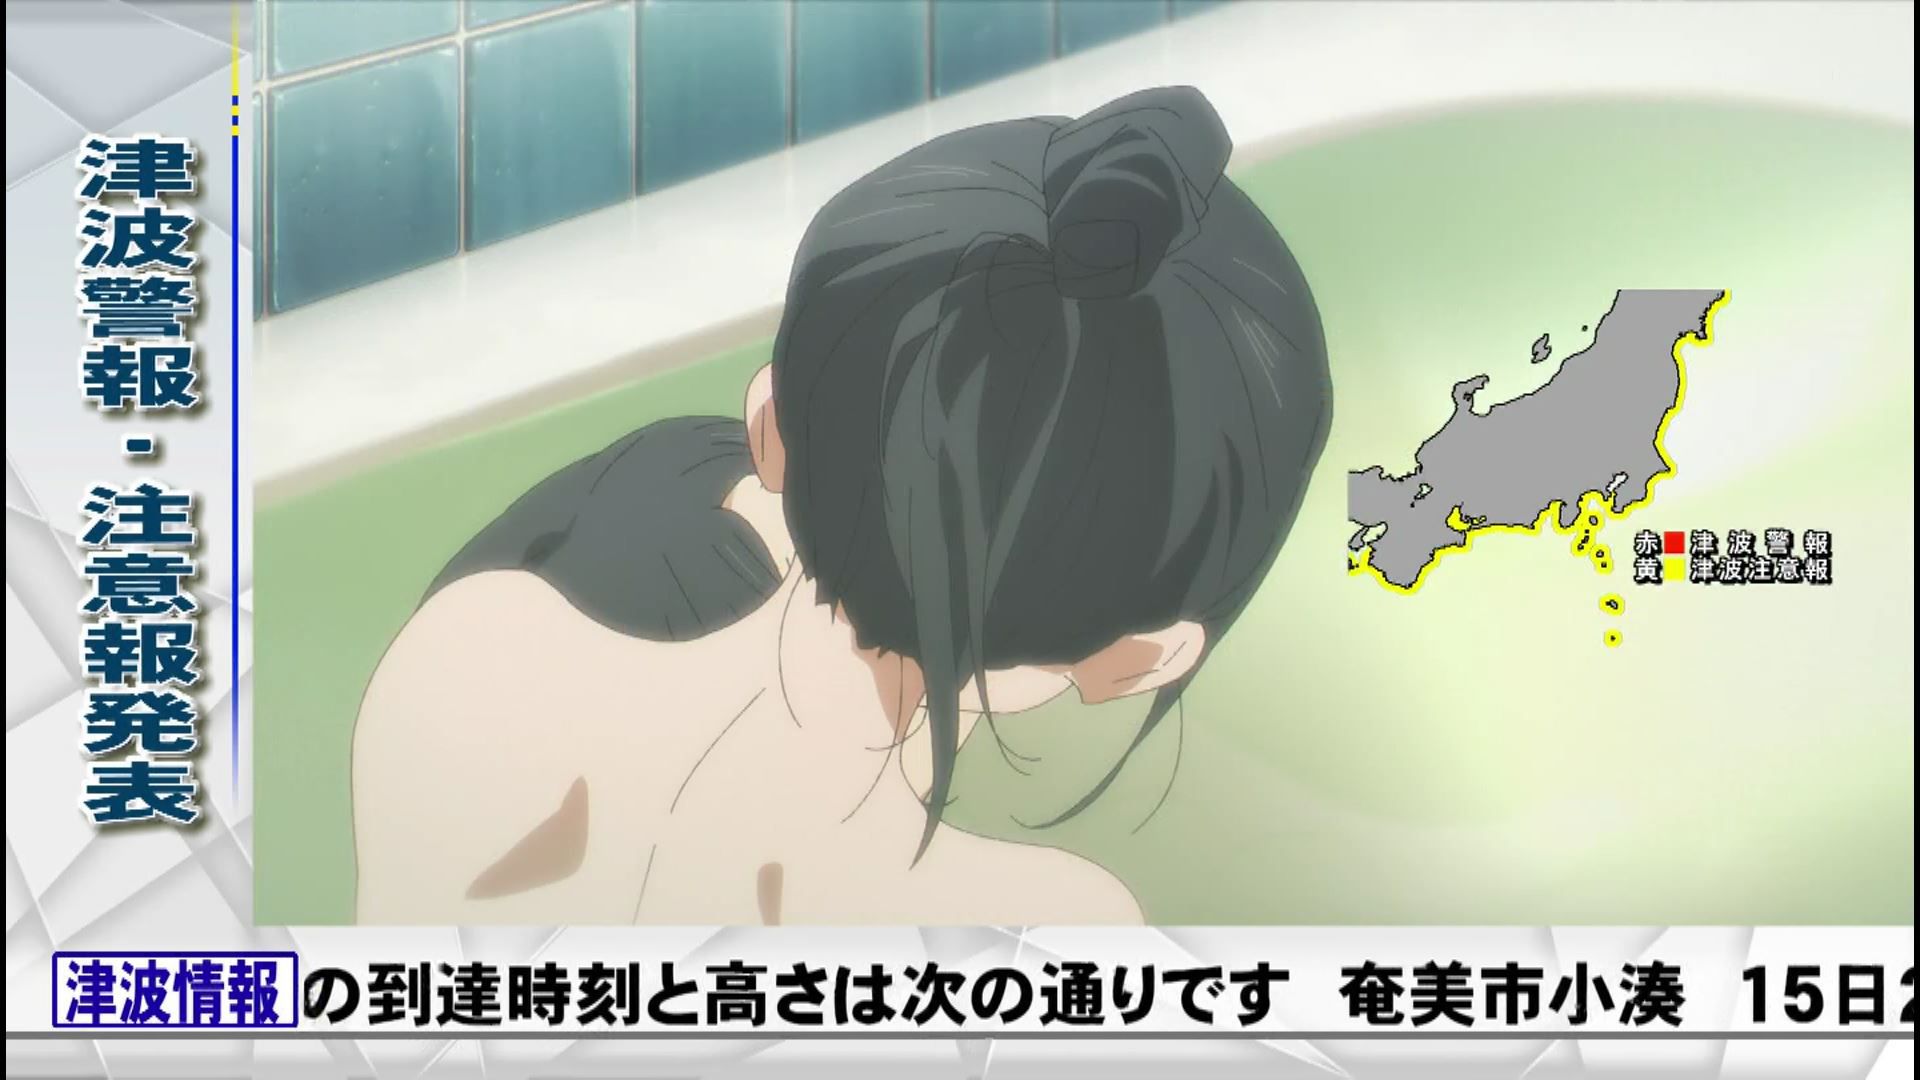 In the anime "Tomorrow-chan's Sailor Suit" episode 2, the girl's erotic bathing scene and the punchy scene 15